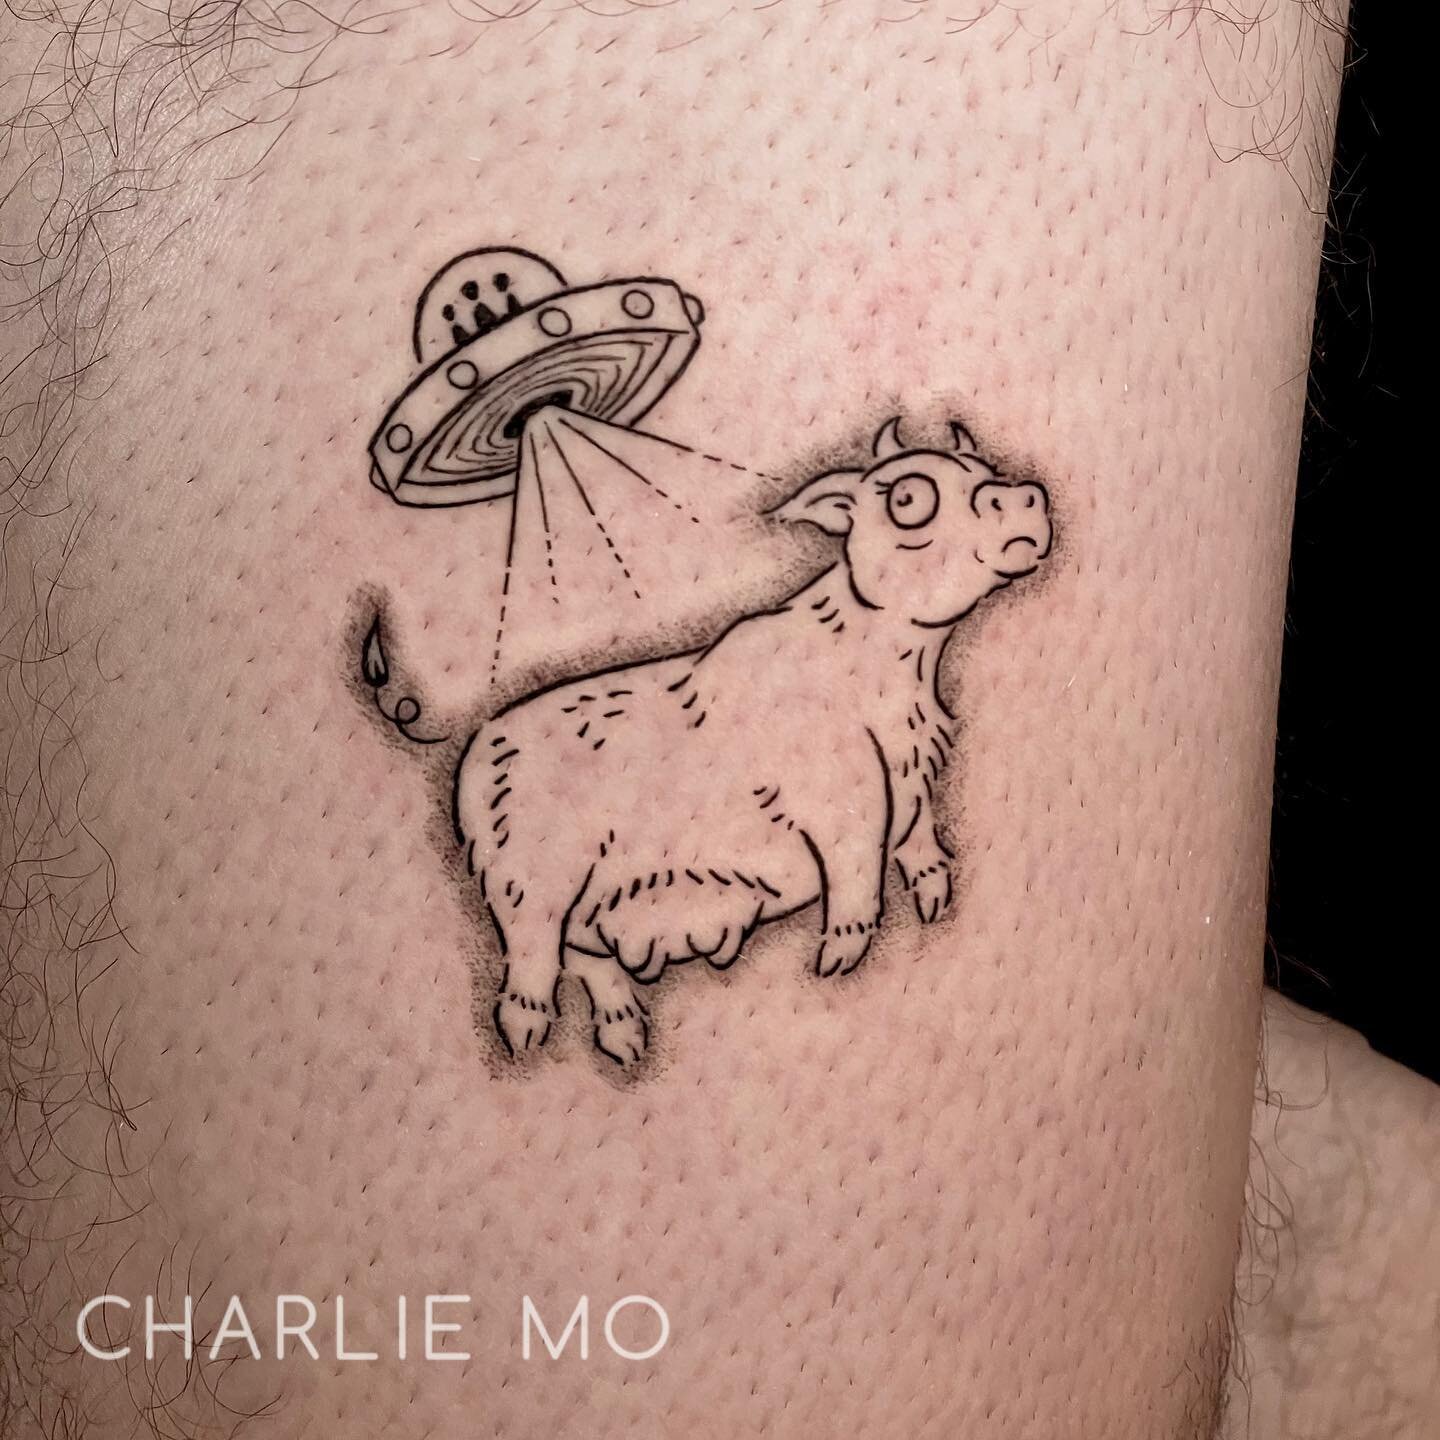 Another one of my ufo cow repeatable flash adopted! Thank you so much William~ 

#flashtattoo #bayareatattooartist #drawing #blacktattoo #illustration #cutetattoo